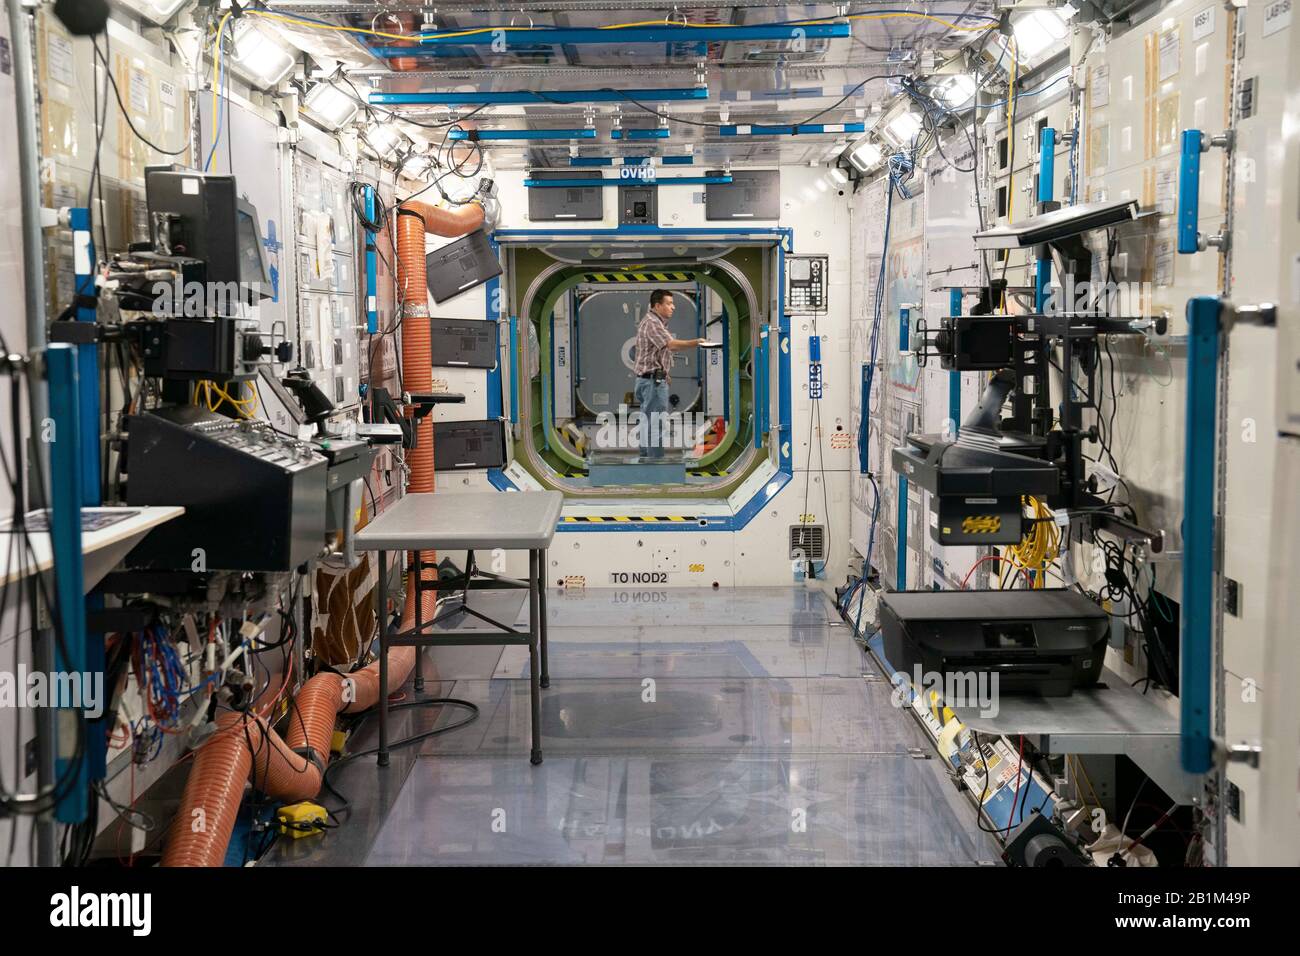 Interior of a full-size mock-up of the International Space Station (ISS) at the Johnson Space Center. The facility is used for astronaut training to familiarize them with the ISS before missions. Stock Photo